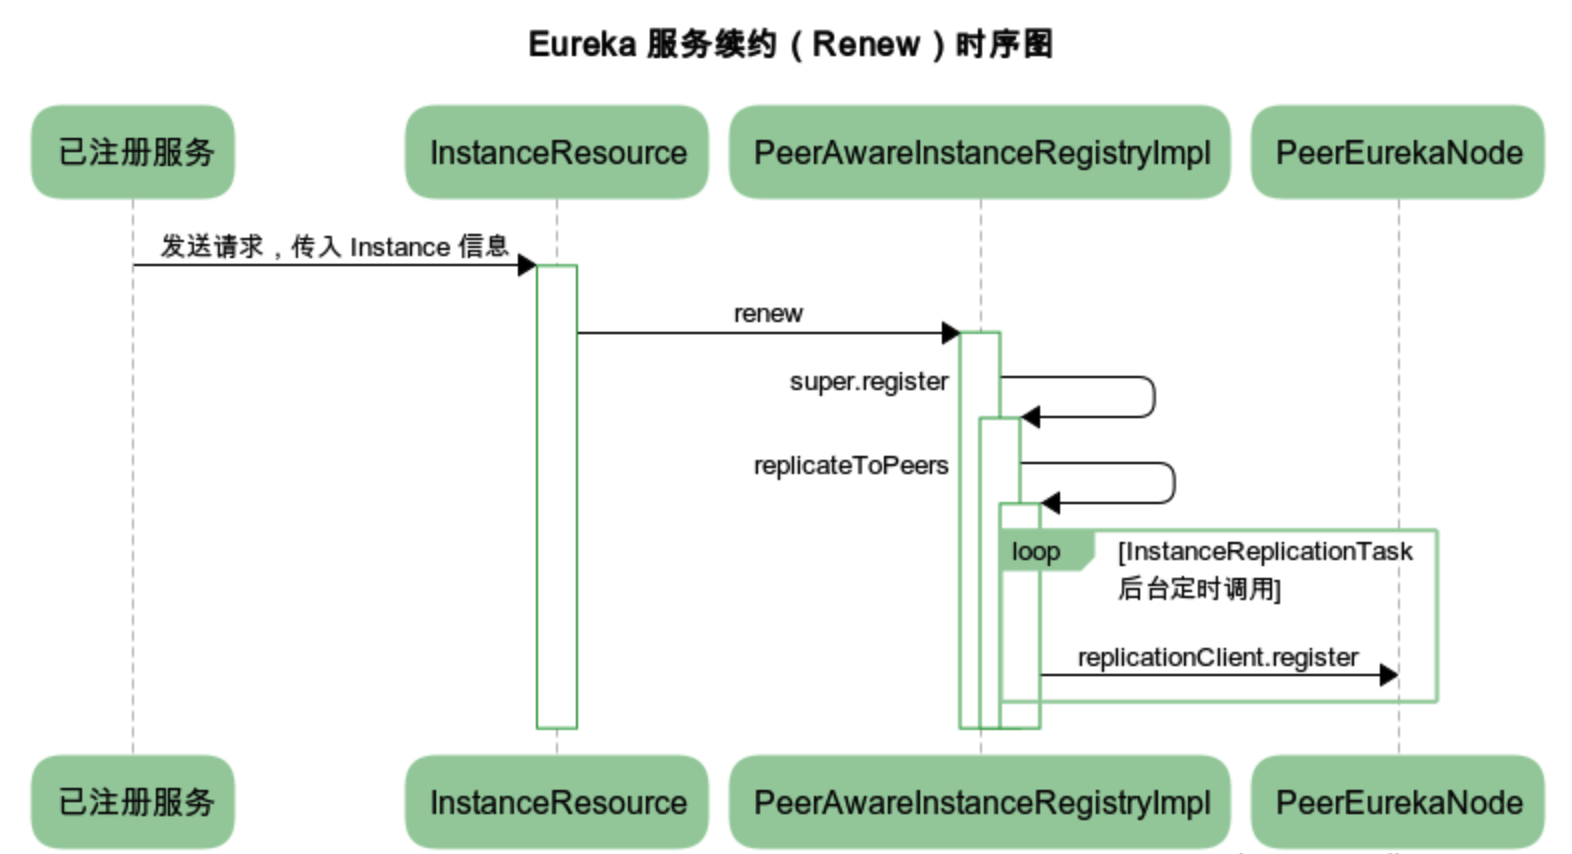 docs/micro-services/images/eureka-server-renew-sequence-chart.png